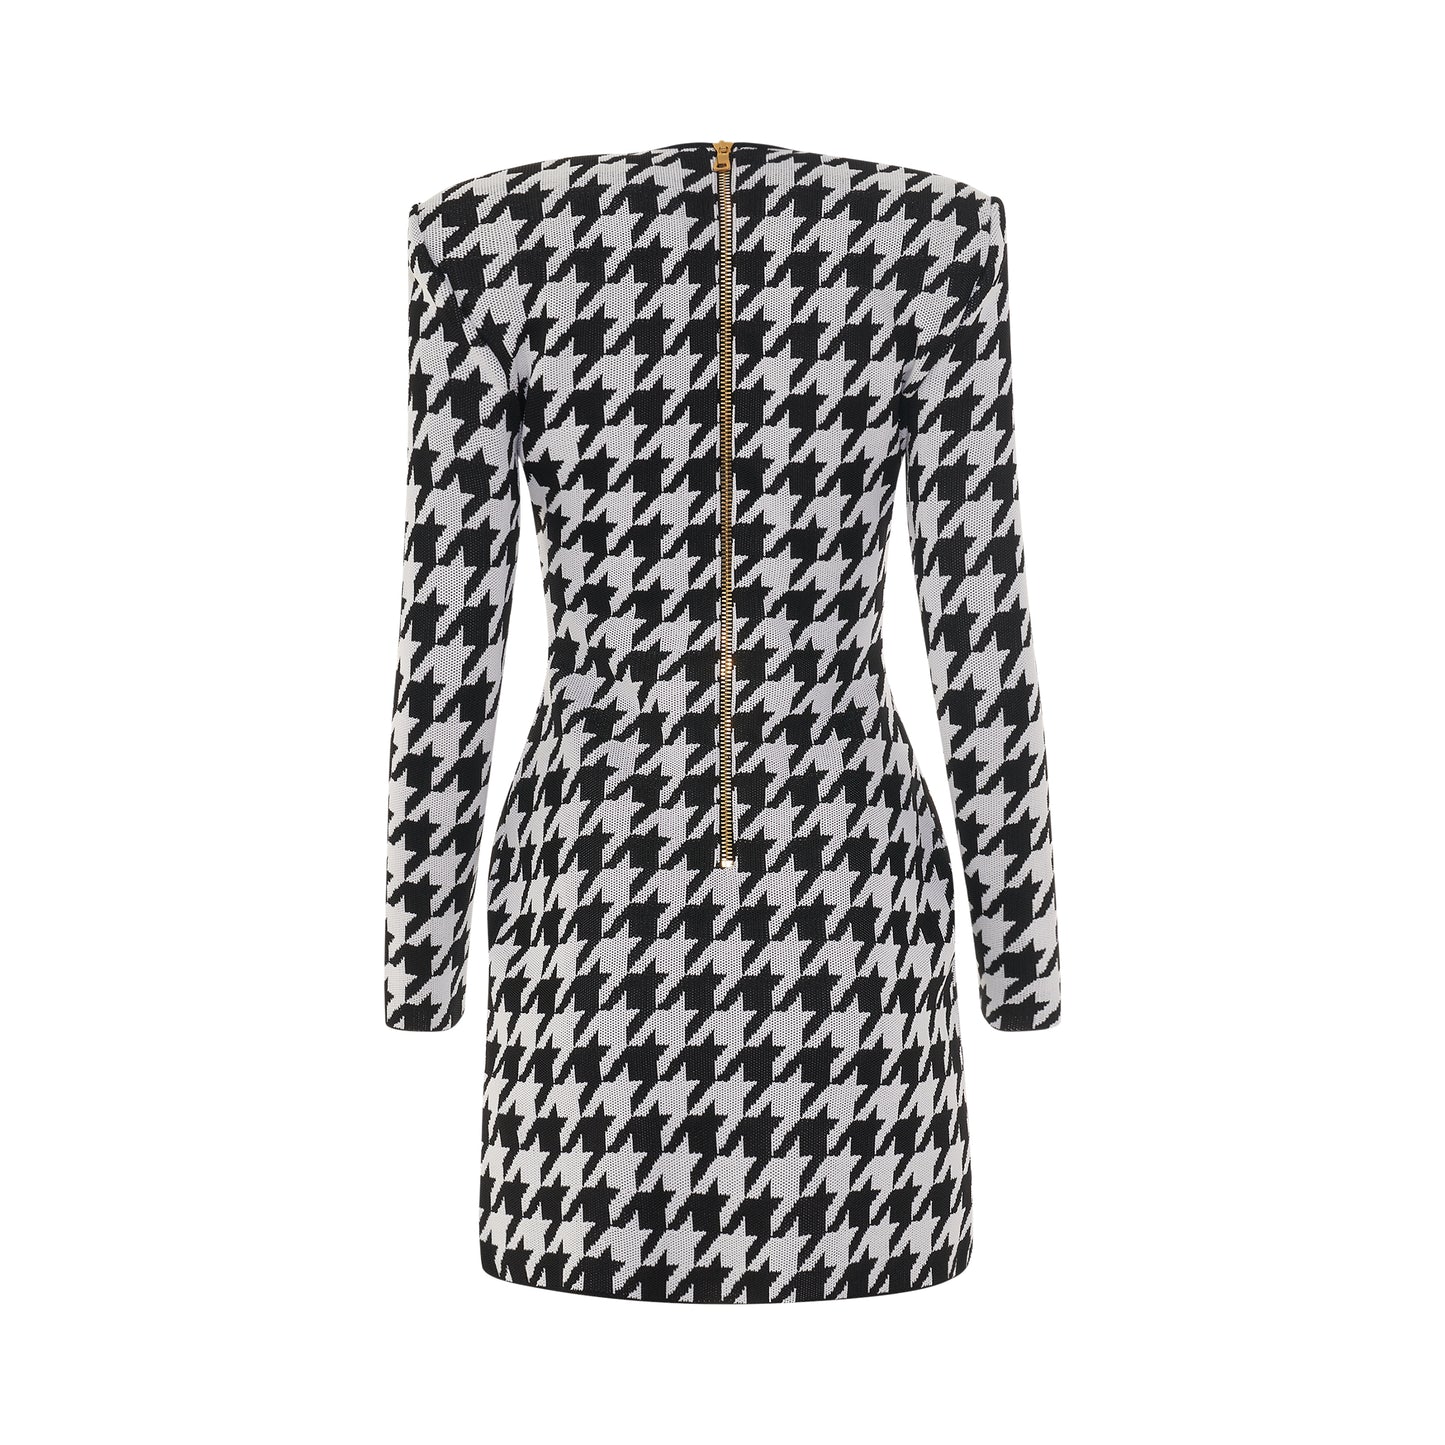 Long Sleeve 6 Button Houndstooth Wrap Knit Dress in Black/White